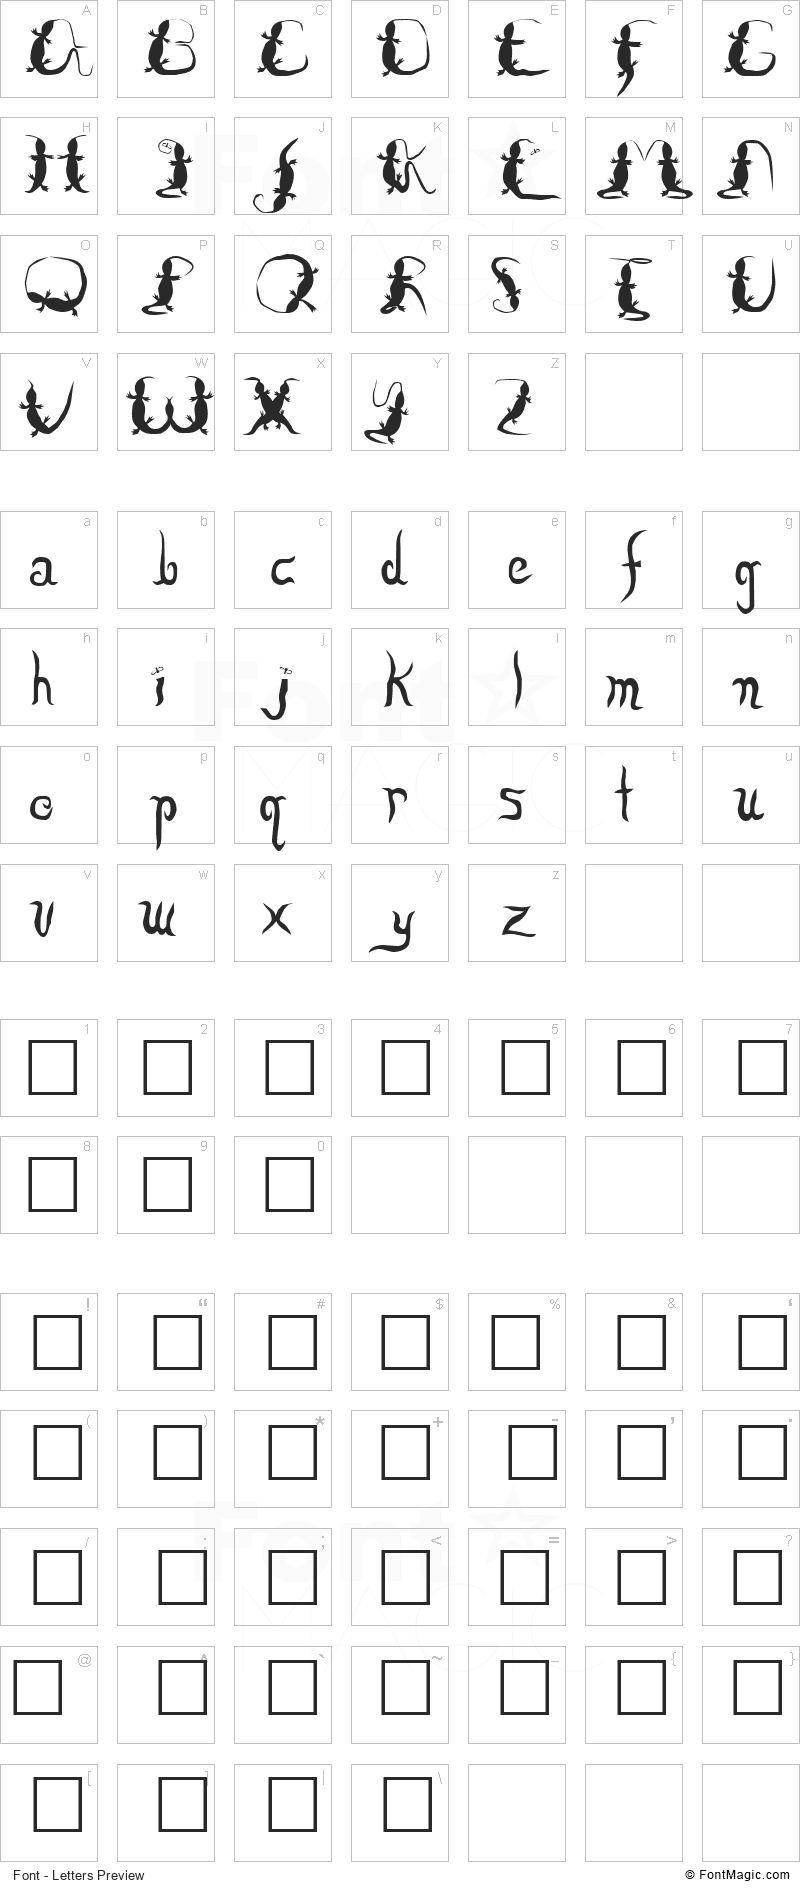 Lizzard Font - All Latters Preview Chart